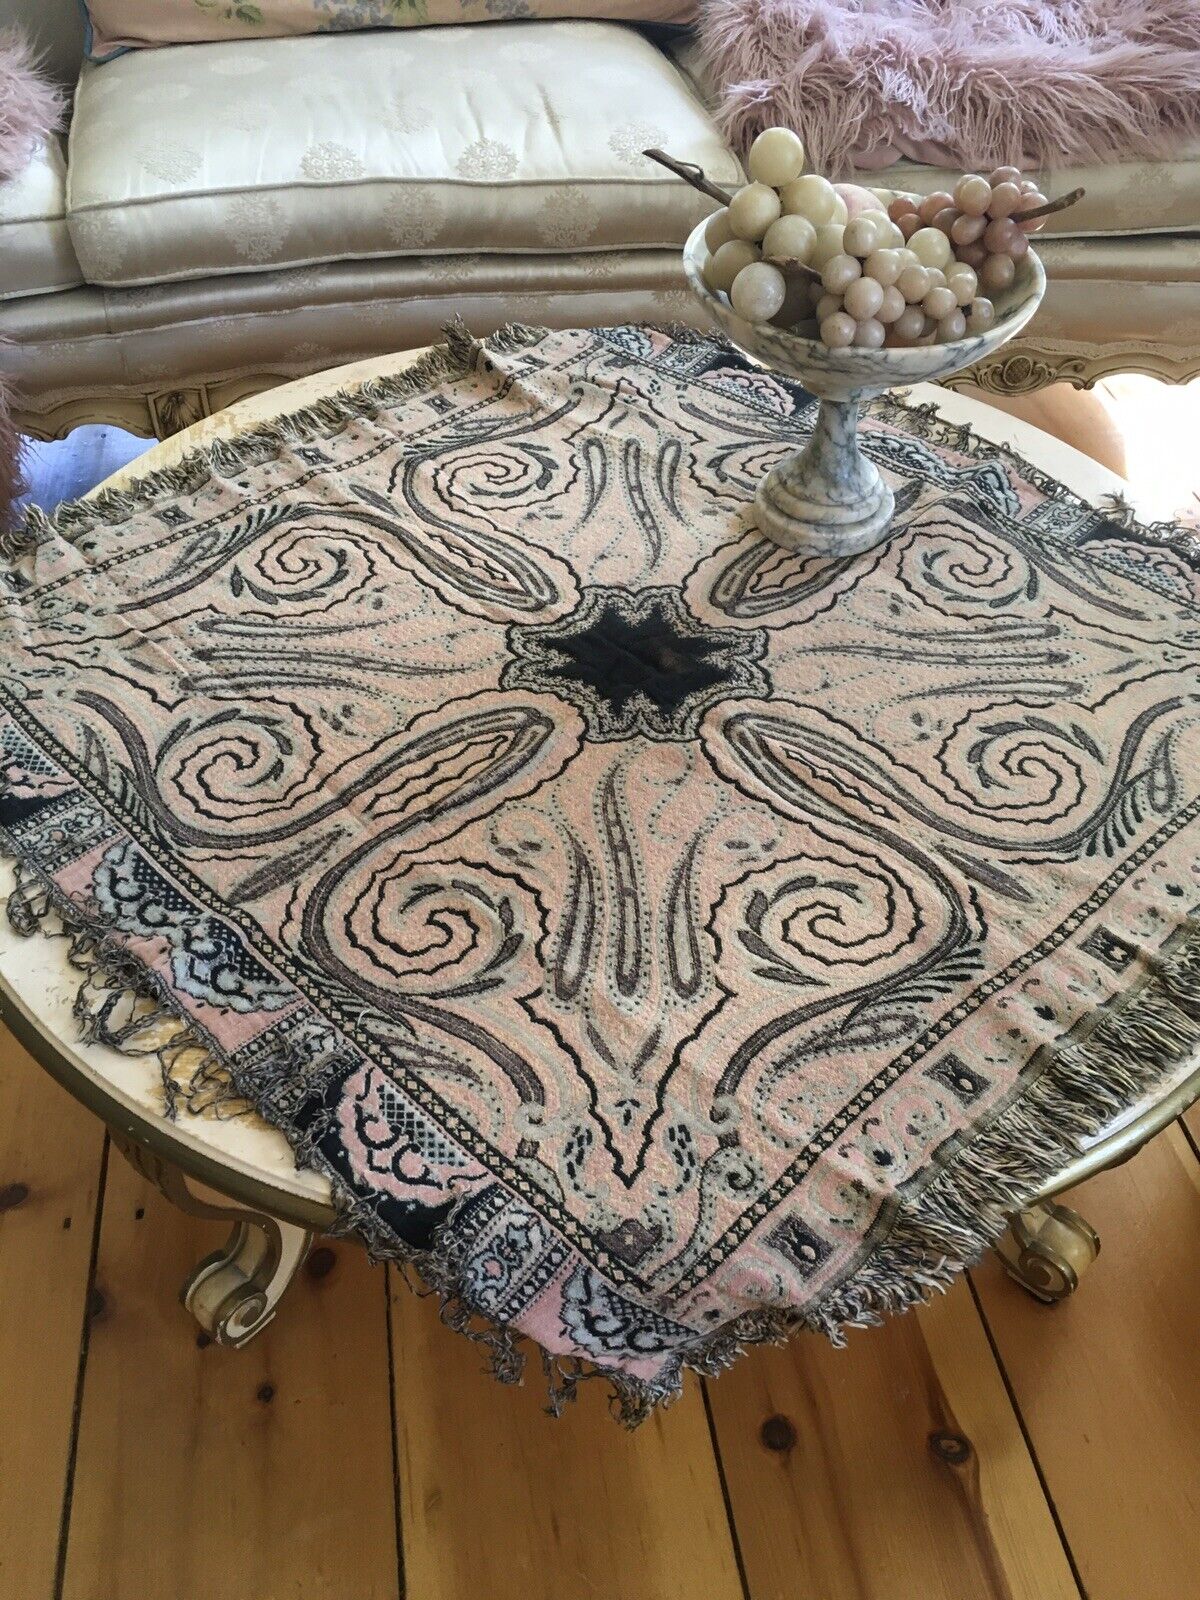 Lovely Antique Paisley Table Shawl 1900-1940 Tablecloth Fringe Trim #1B